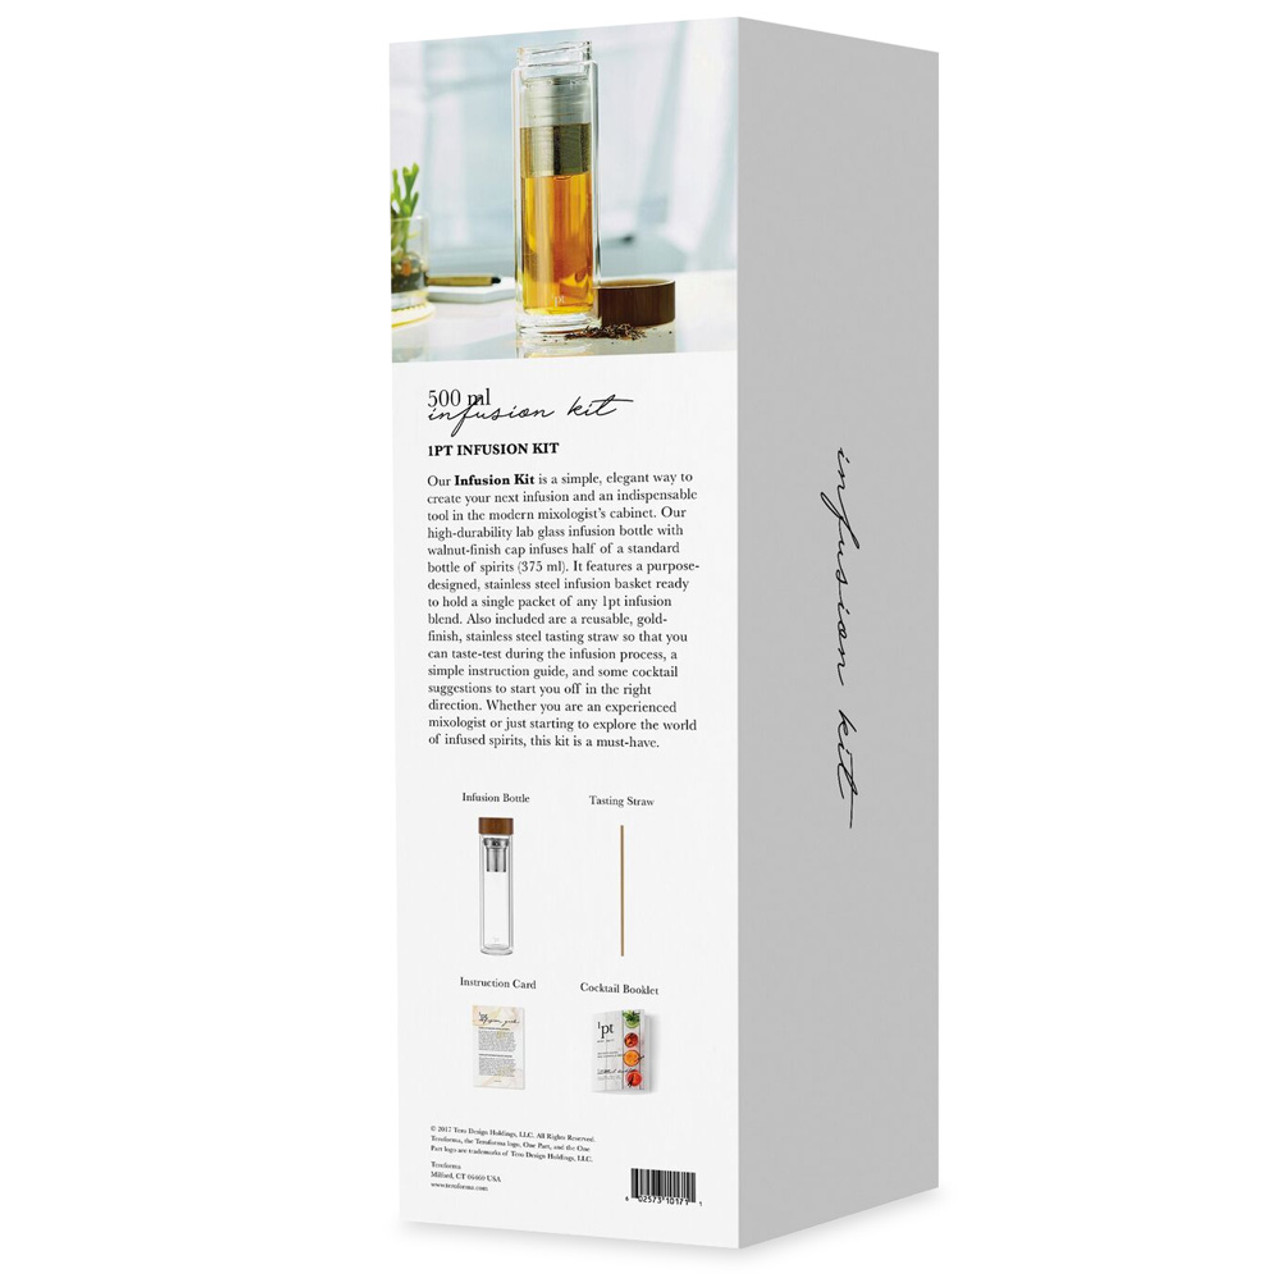 https://cdn11.bigcommerce.com/s-cznxq08r7/images/stencil/1280x1280/products/833/2249/bm1666_teroforma-1pt-infusion-basic-bottle-kit-for-alcohol_2__03623.1590765646.jpg?c=1